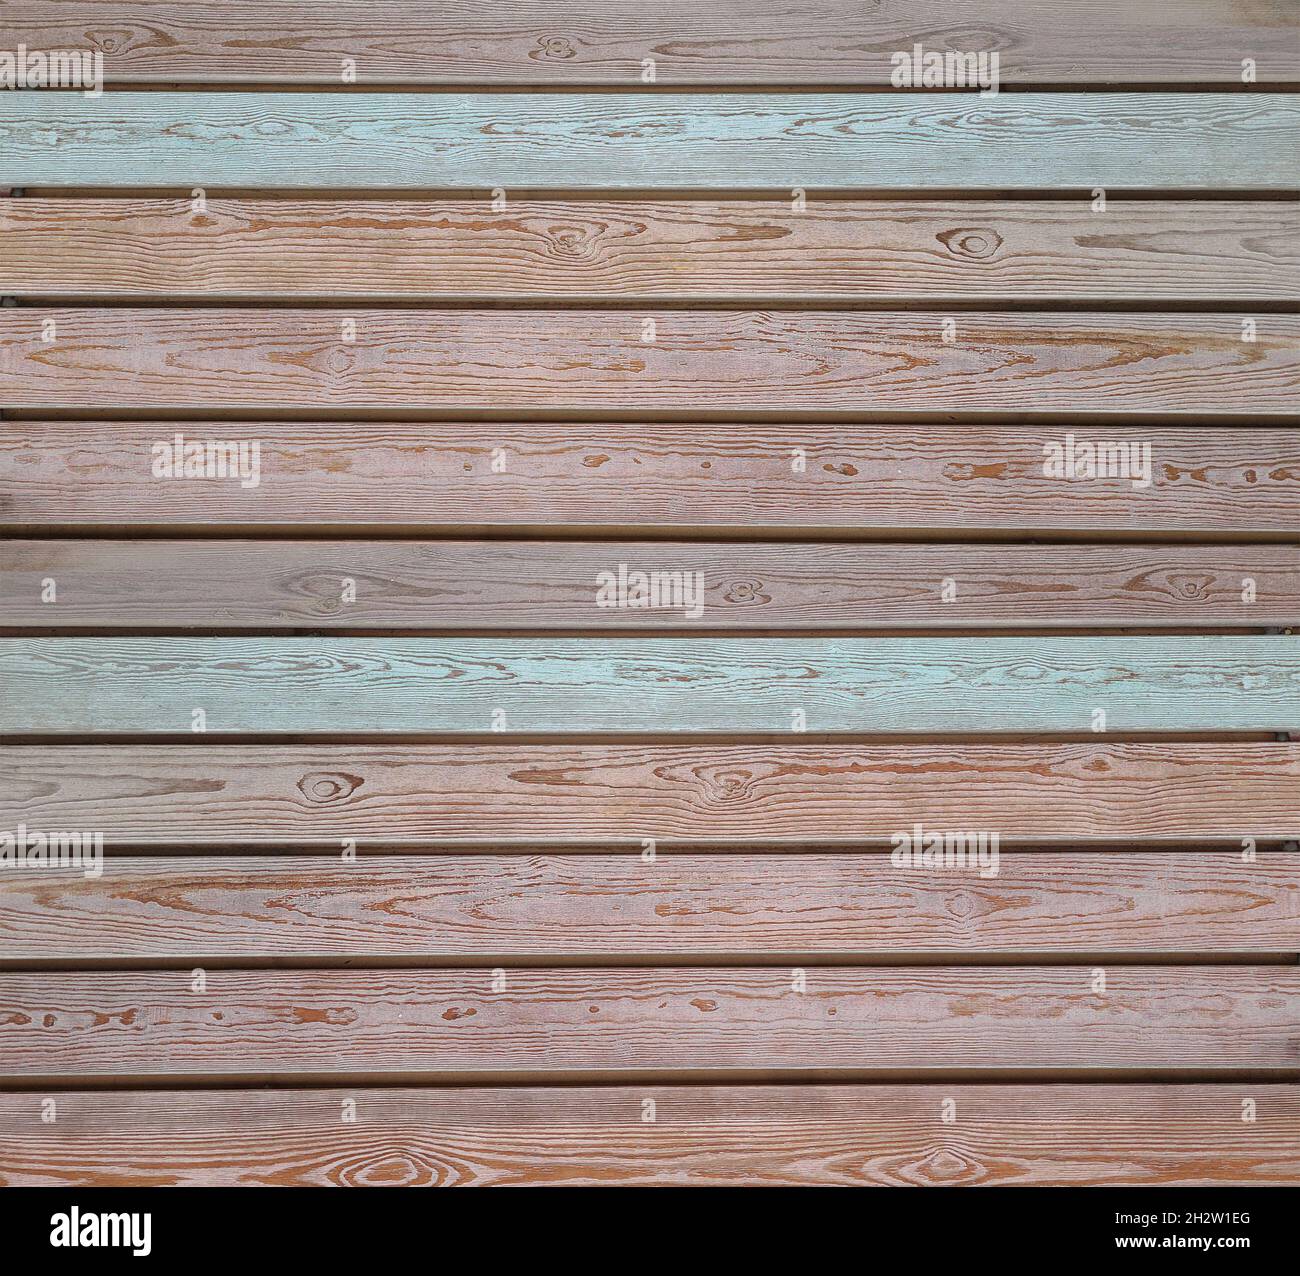 Grunge brown wood wall or fence planks texture Stock Photo